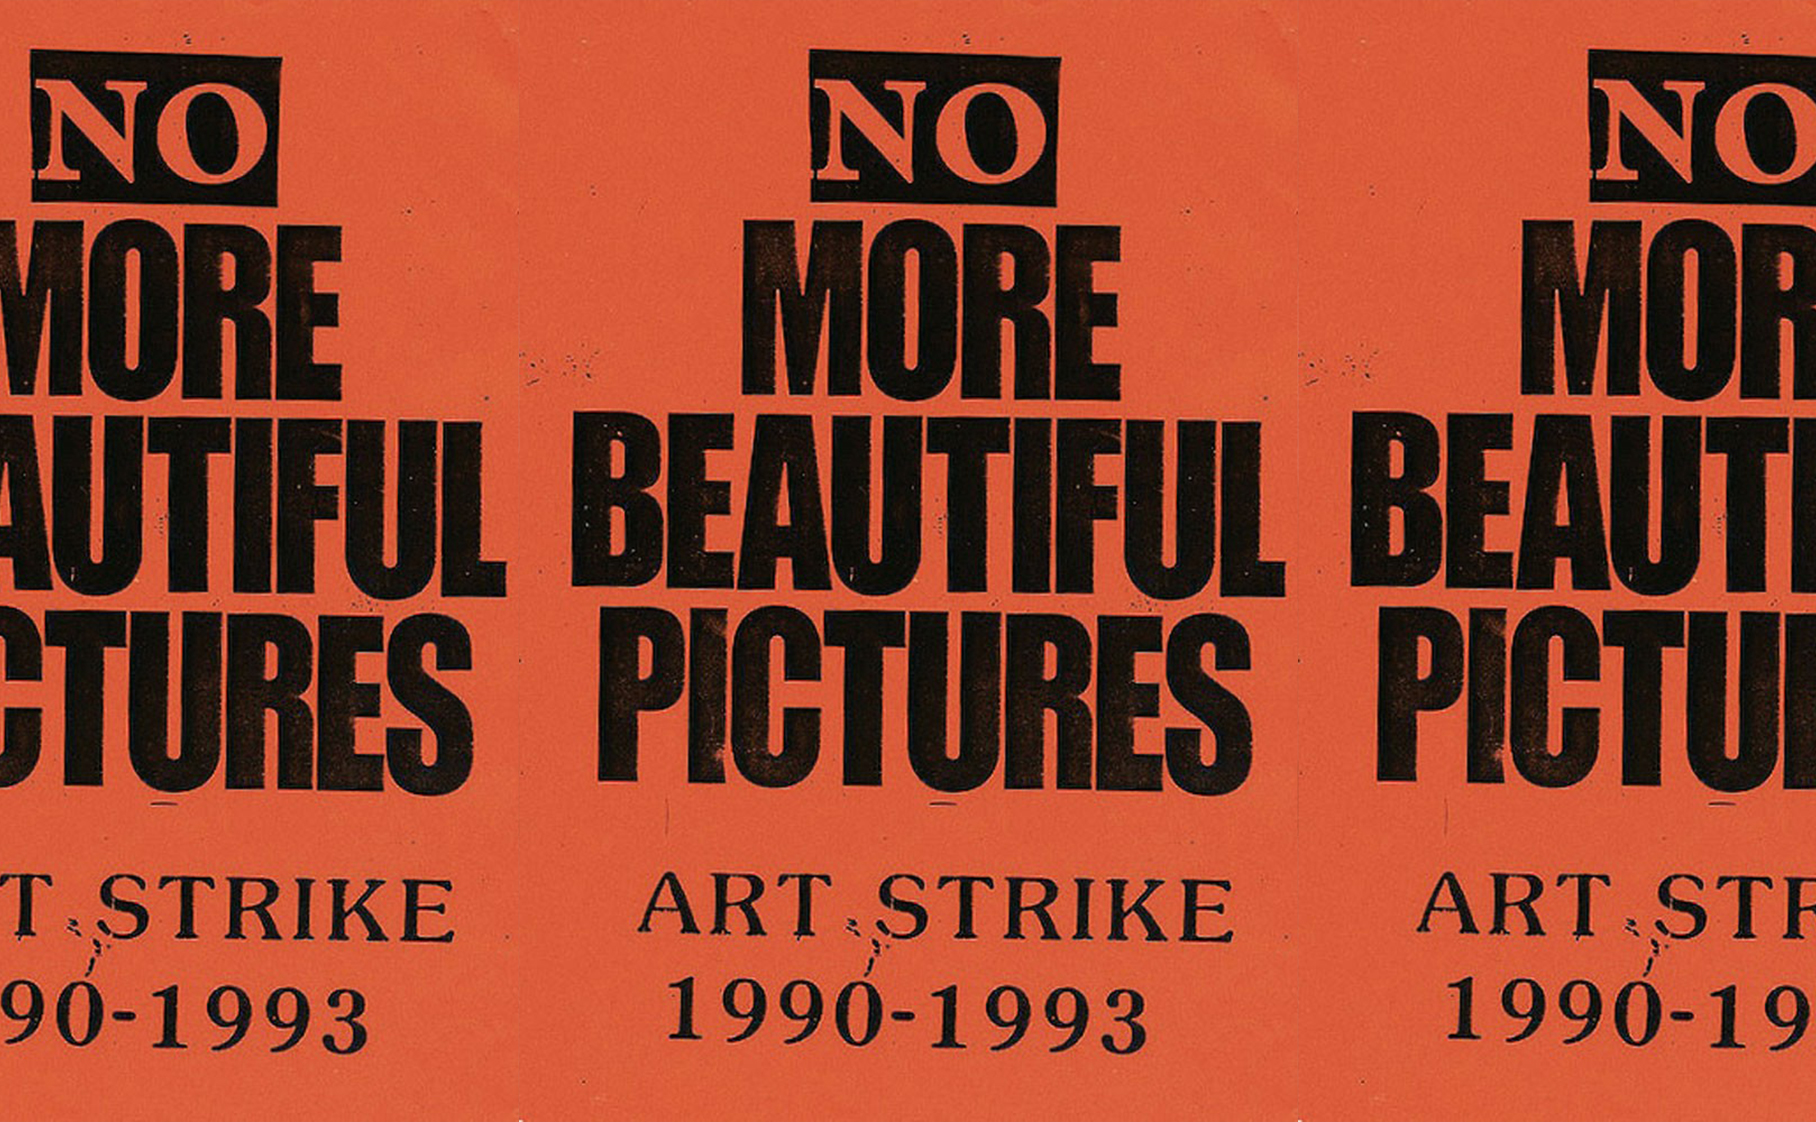 No more beautiful pictures! Art strike!